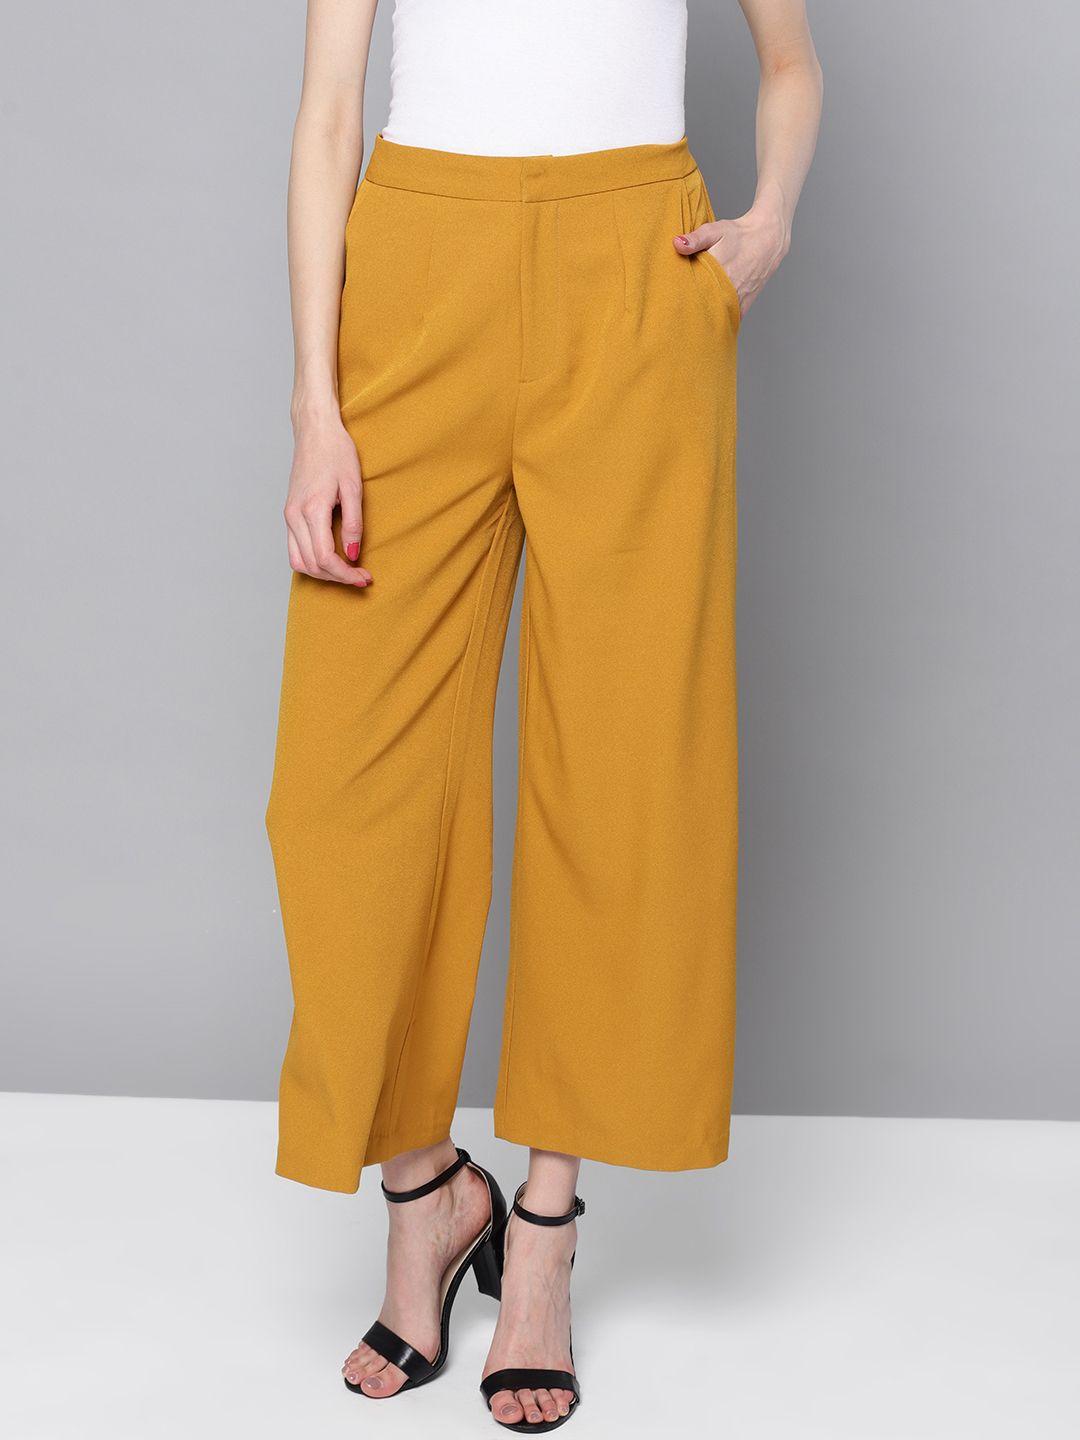 marie claire women mustard yellow regular fit solid parallel trousers